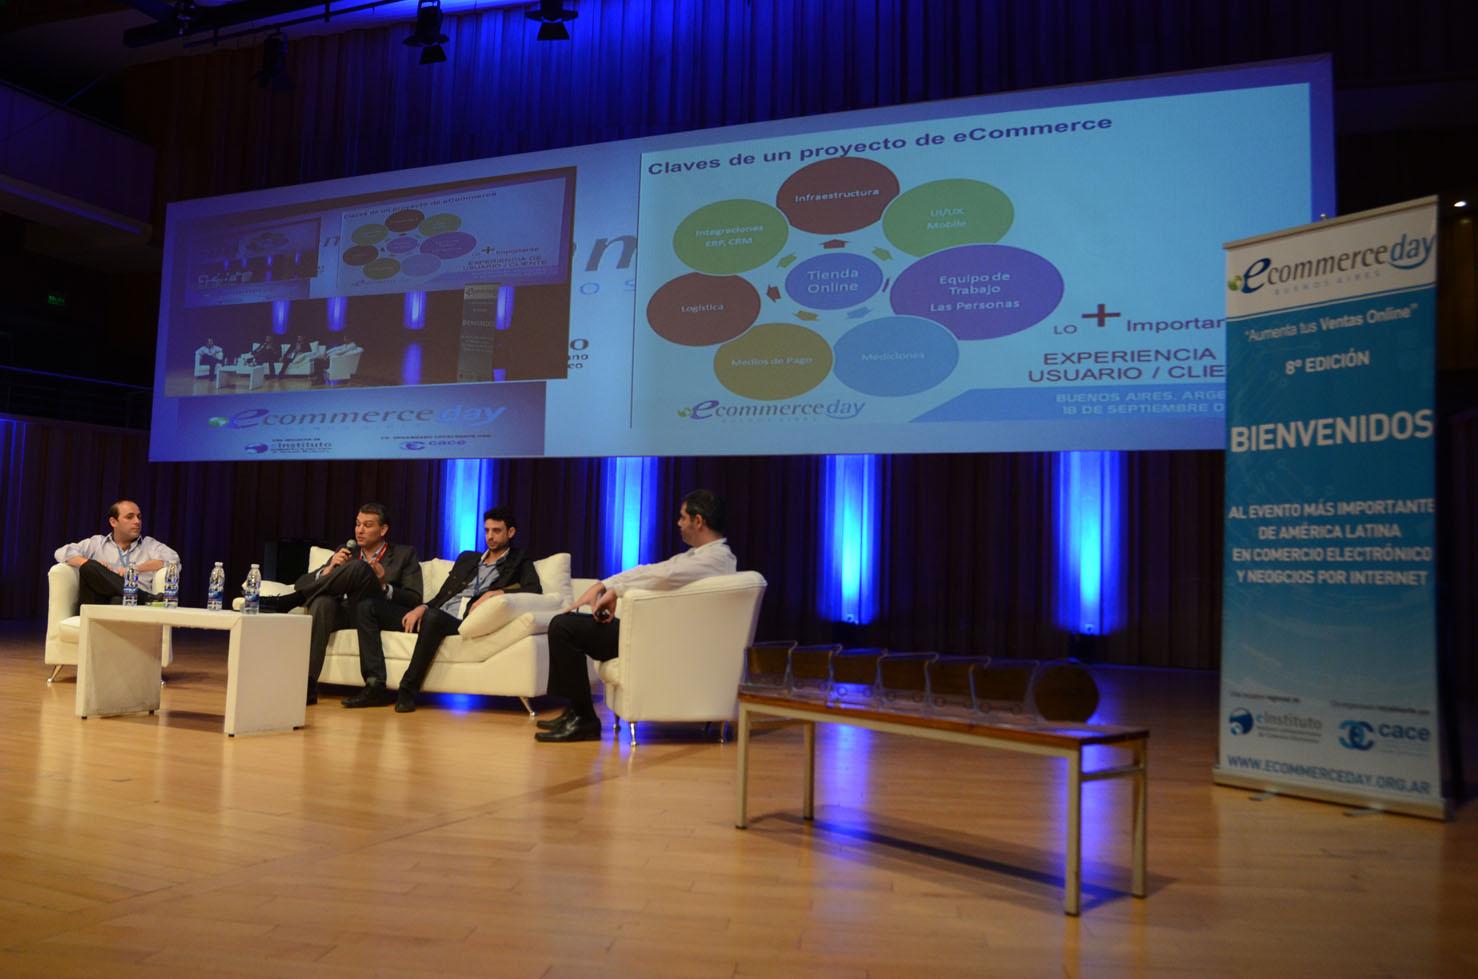 Revive el eCommerce Day Buenos Aires 2014